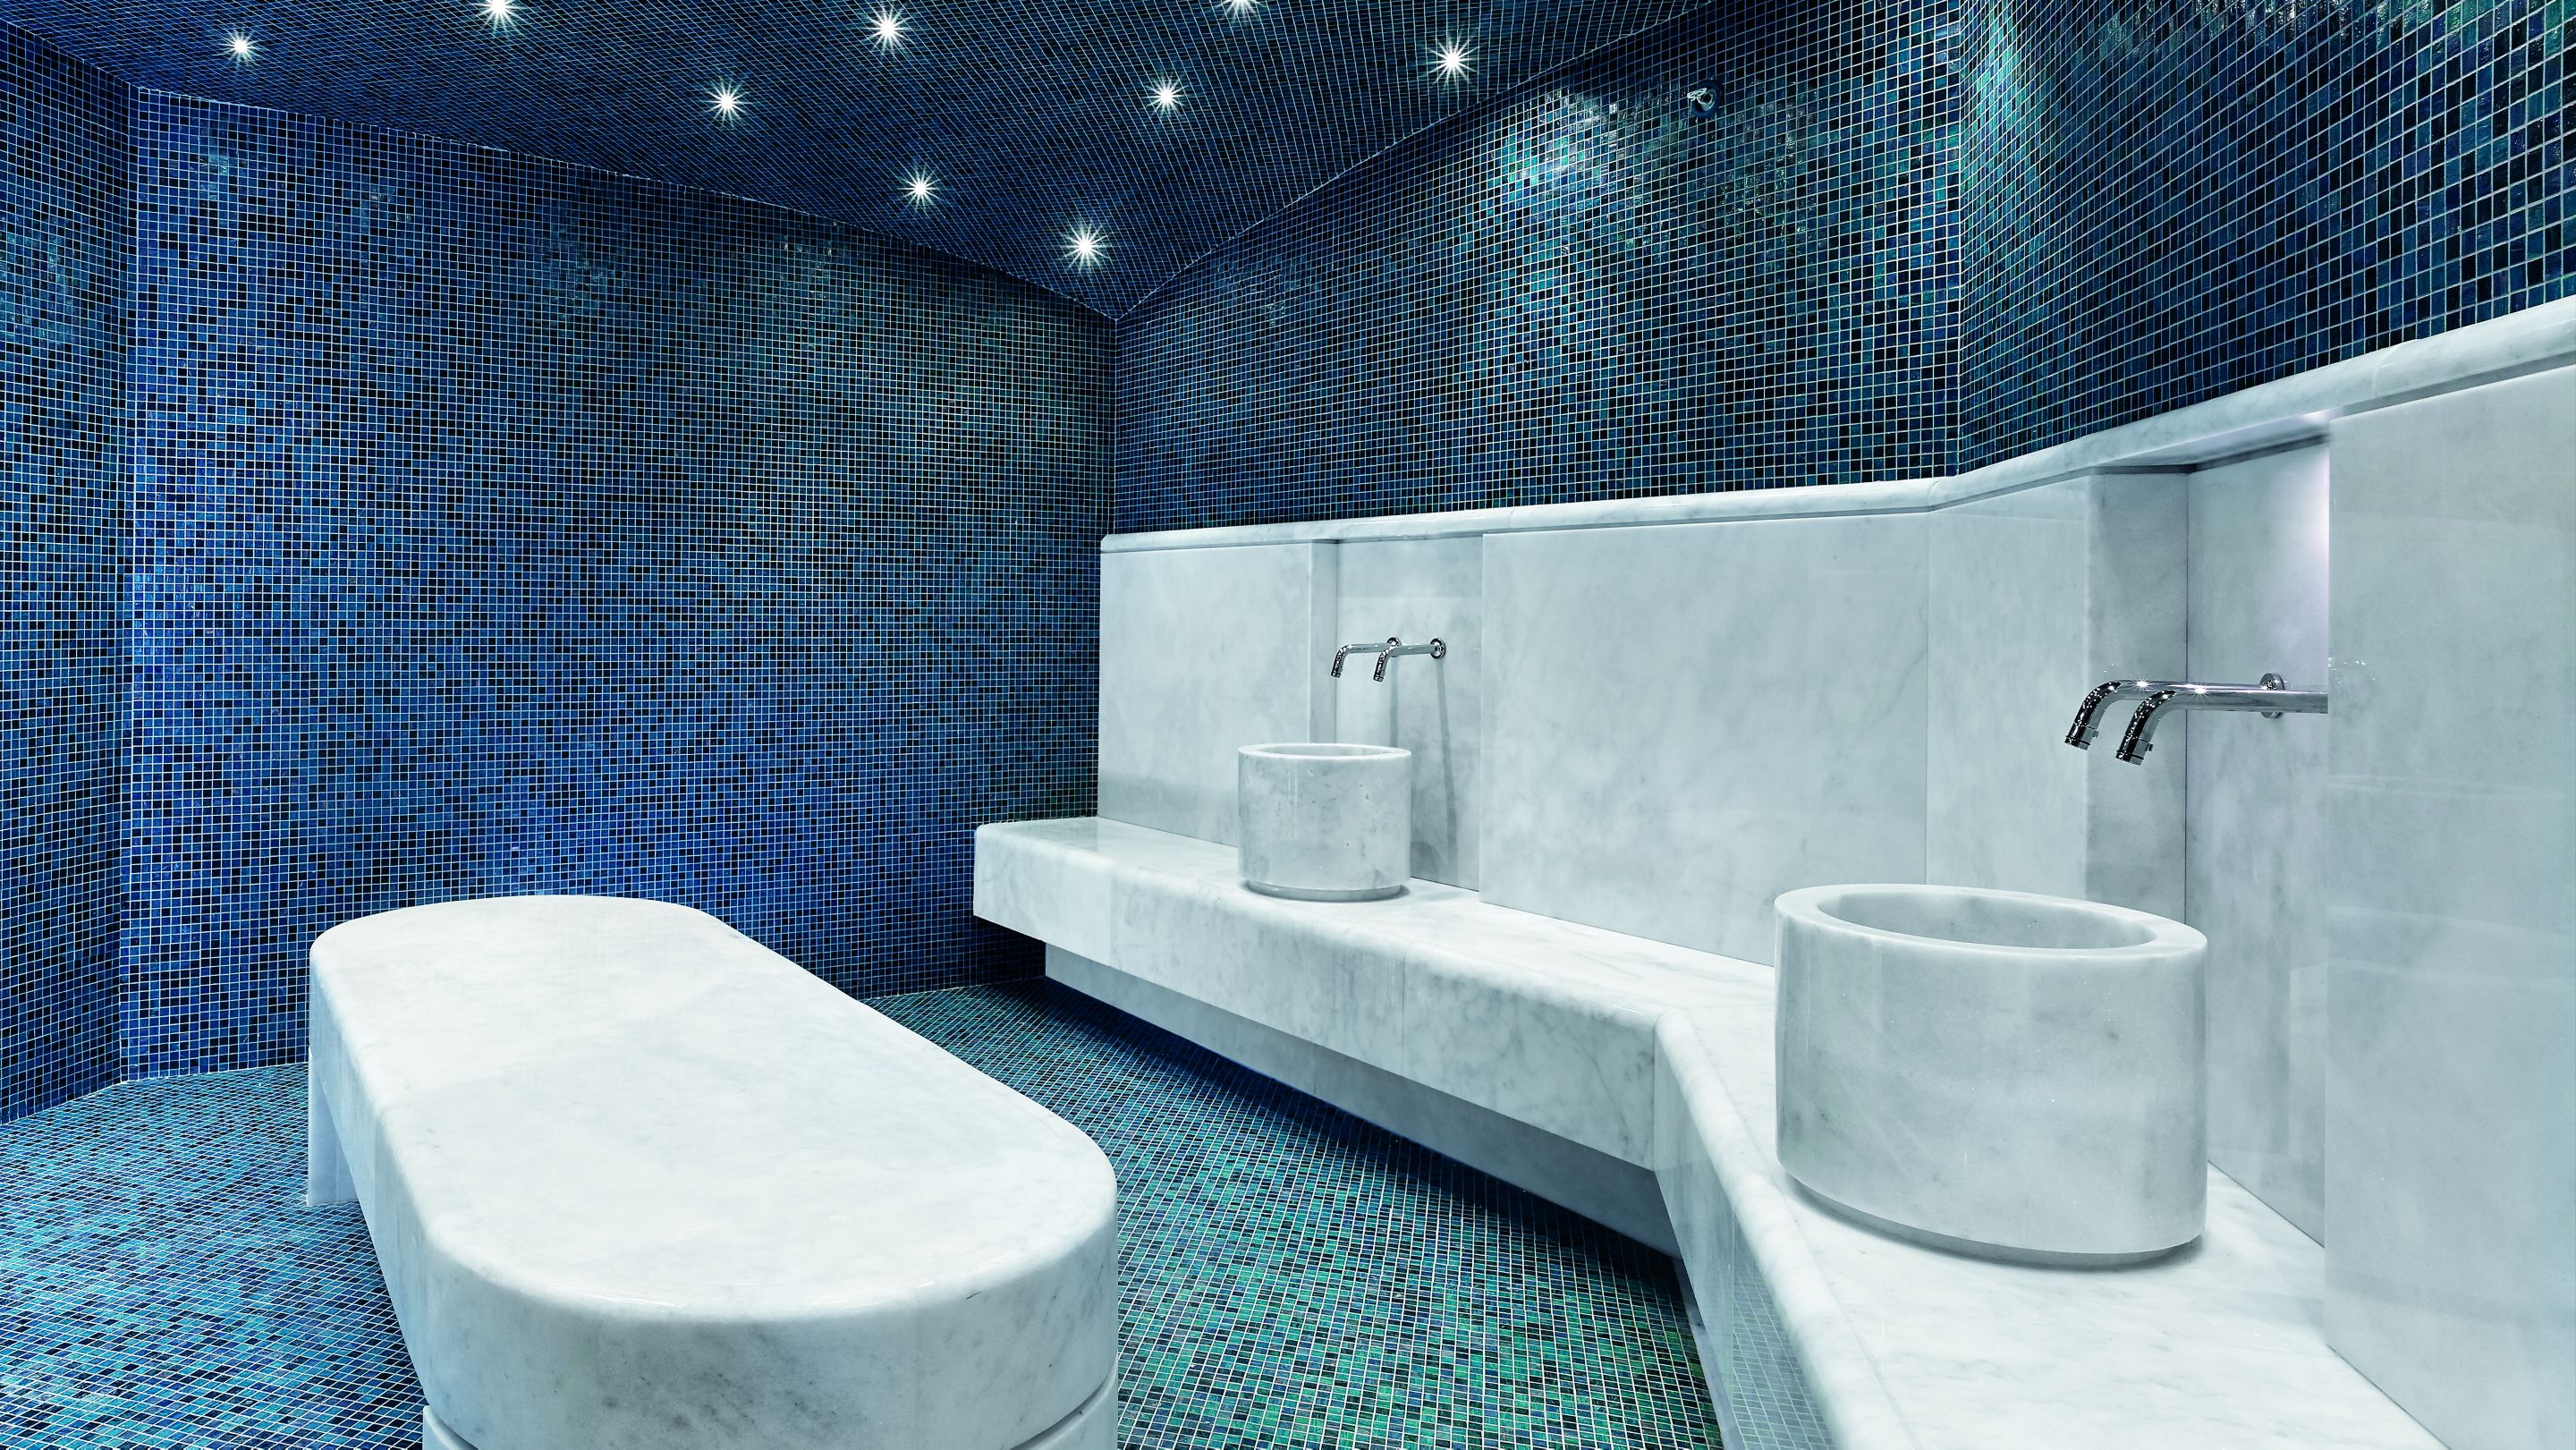 Turkish hammam with white marble fixtures and mosaic tile in blue and sea green